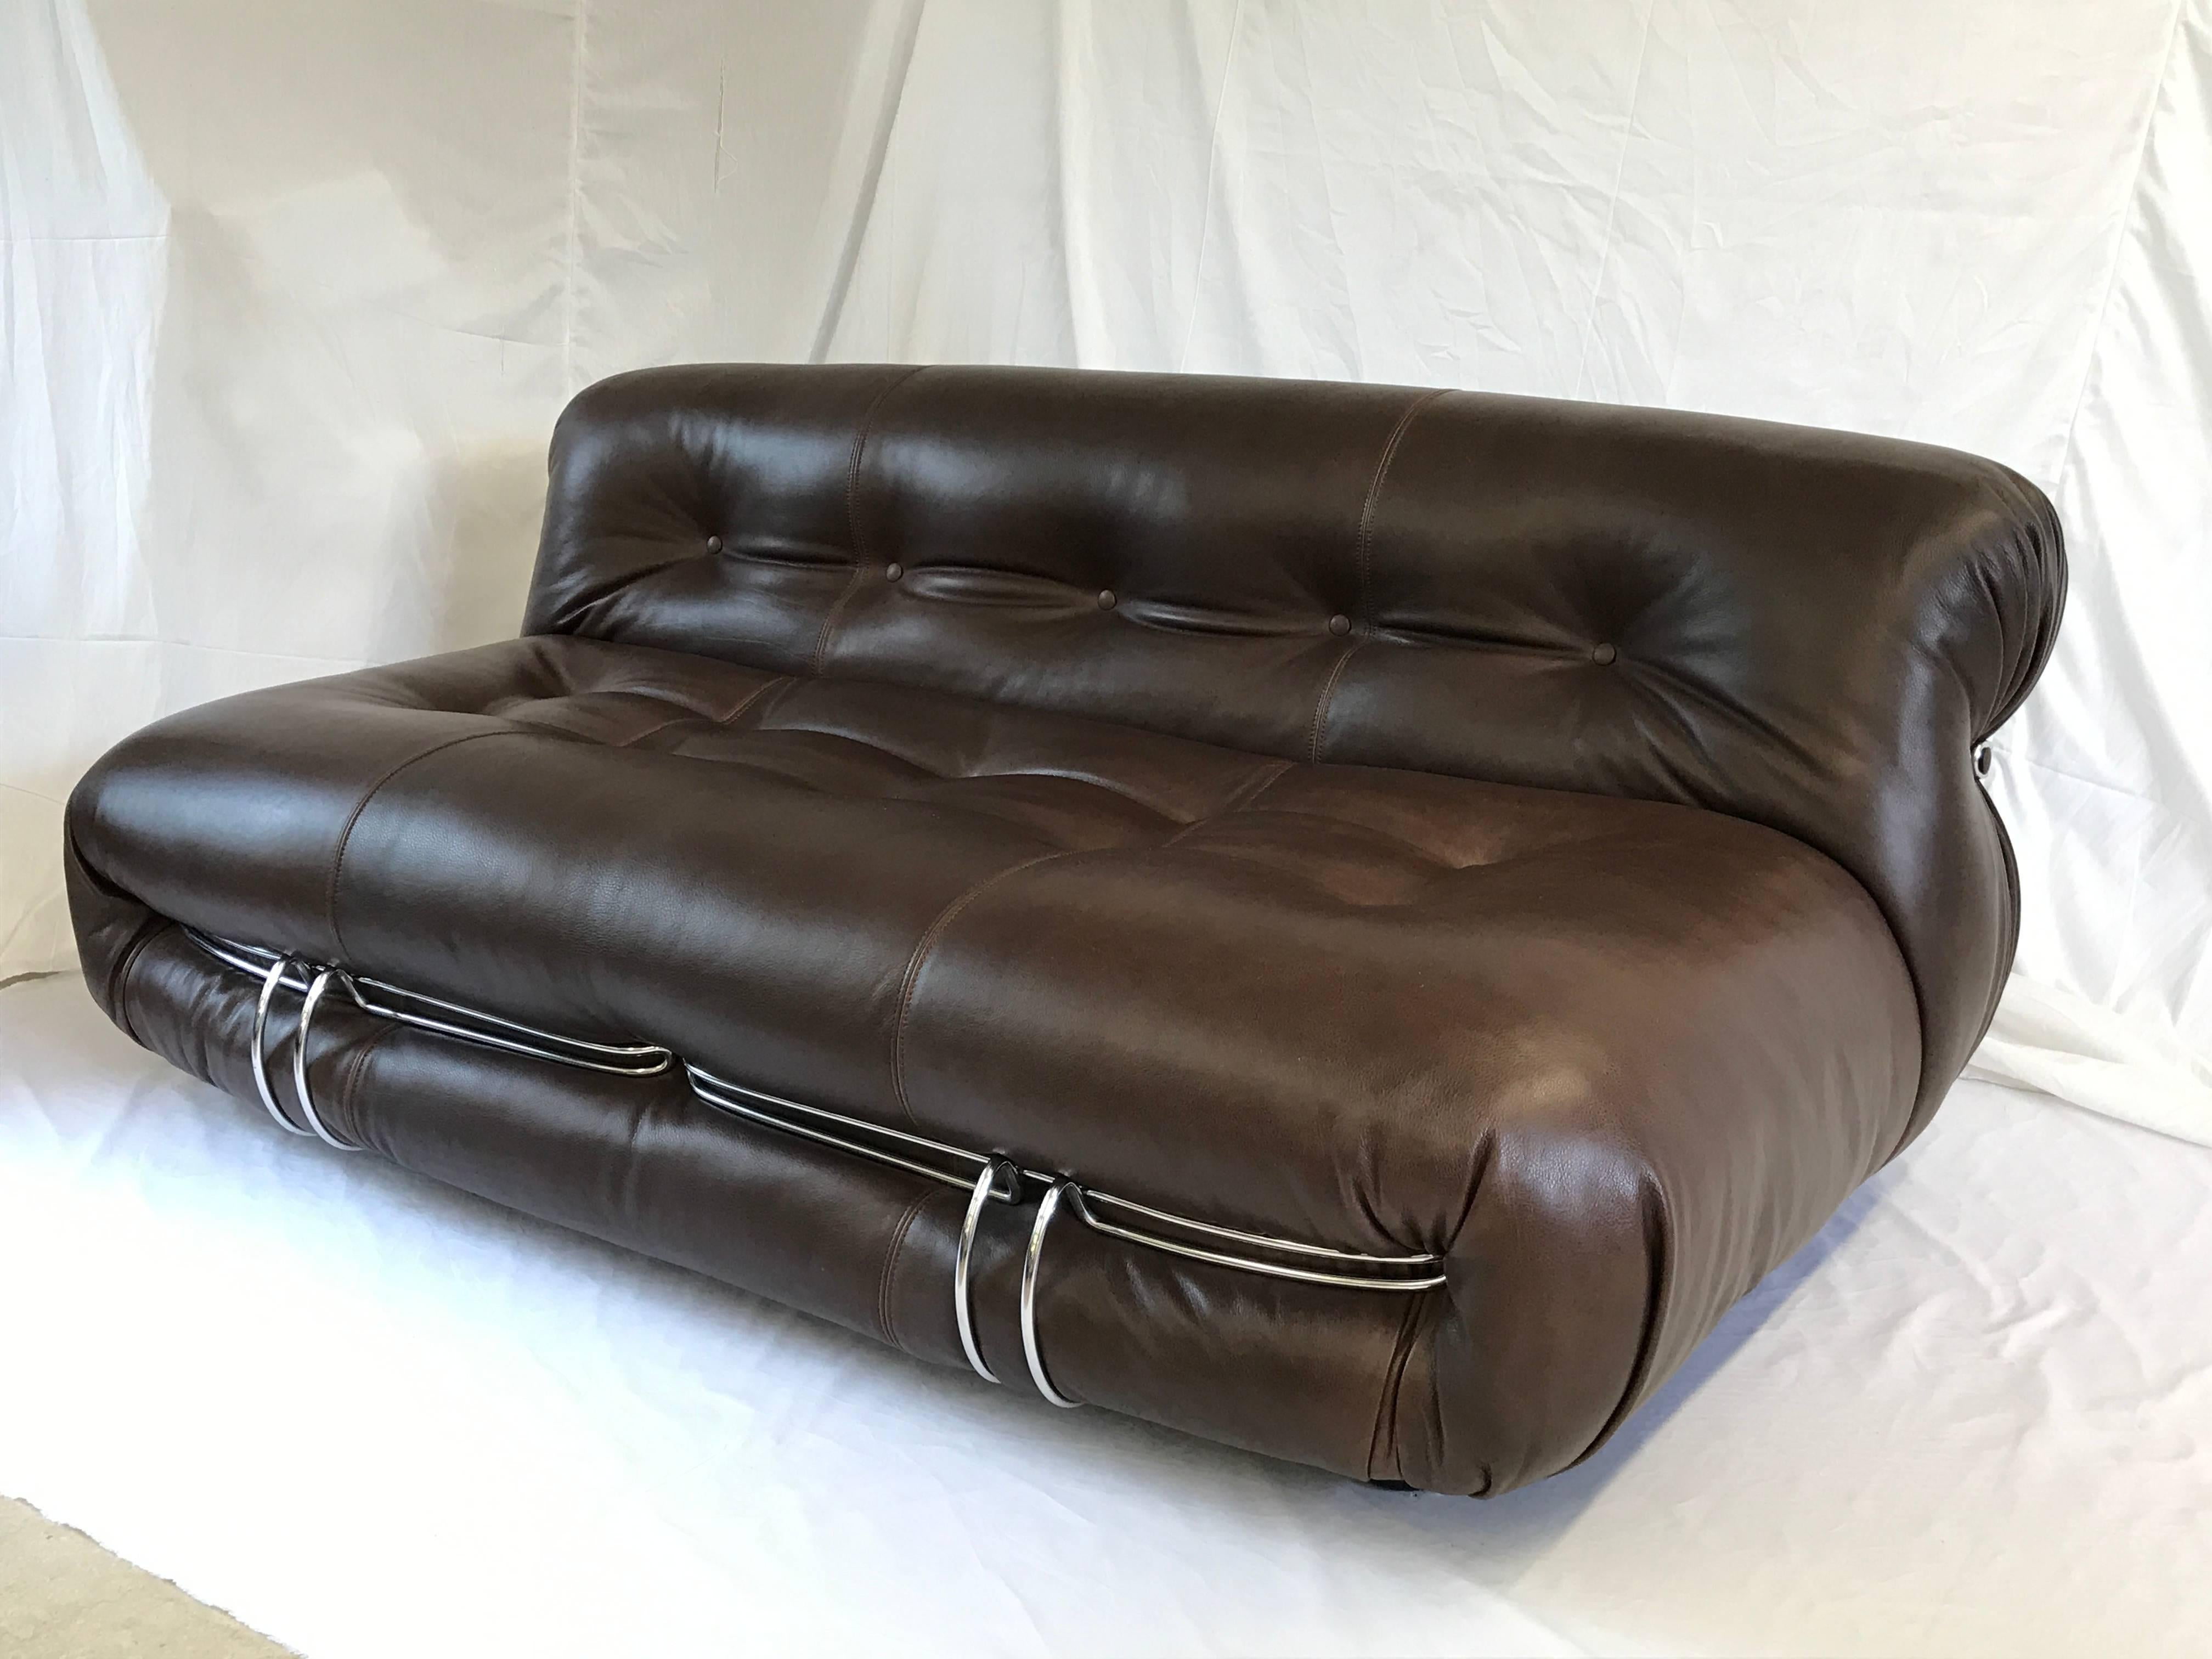 Soriana Sofa and 2 Armchairs COMPLETELY RESTORED, 1970, designed by Tobia Scarpa and manufactured by Cassina. 

LISTING INCLUDES:
1 sofa 67 inches long approx; with two front metal clamps
2 lounge chairs (armless) 

FULLY Restored with a brand new